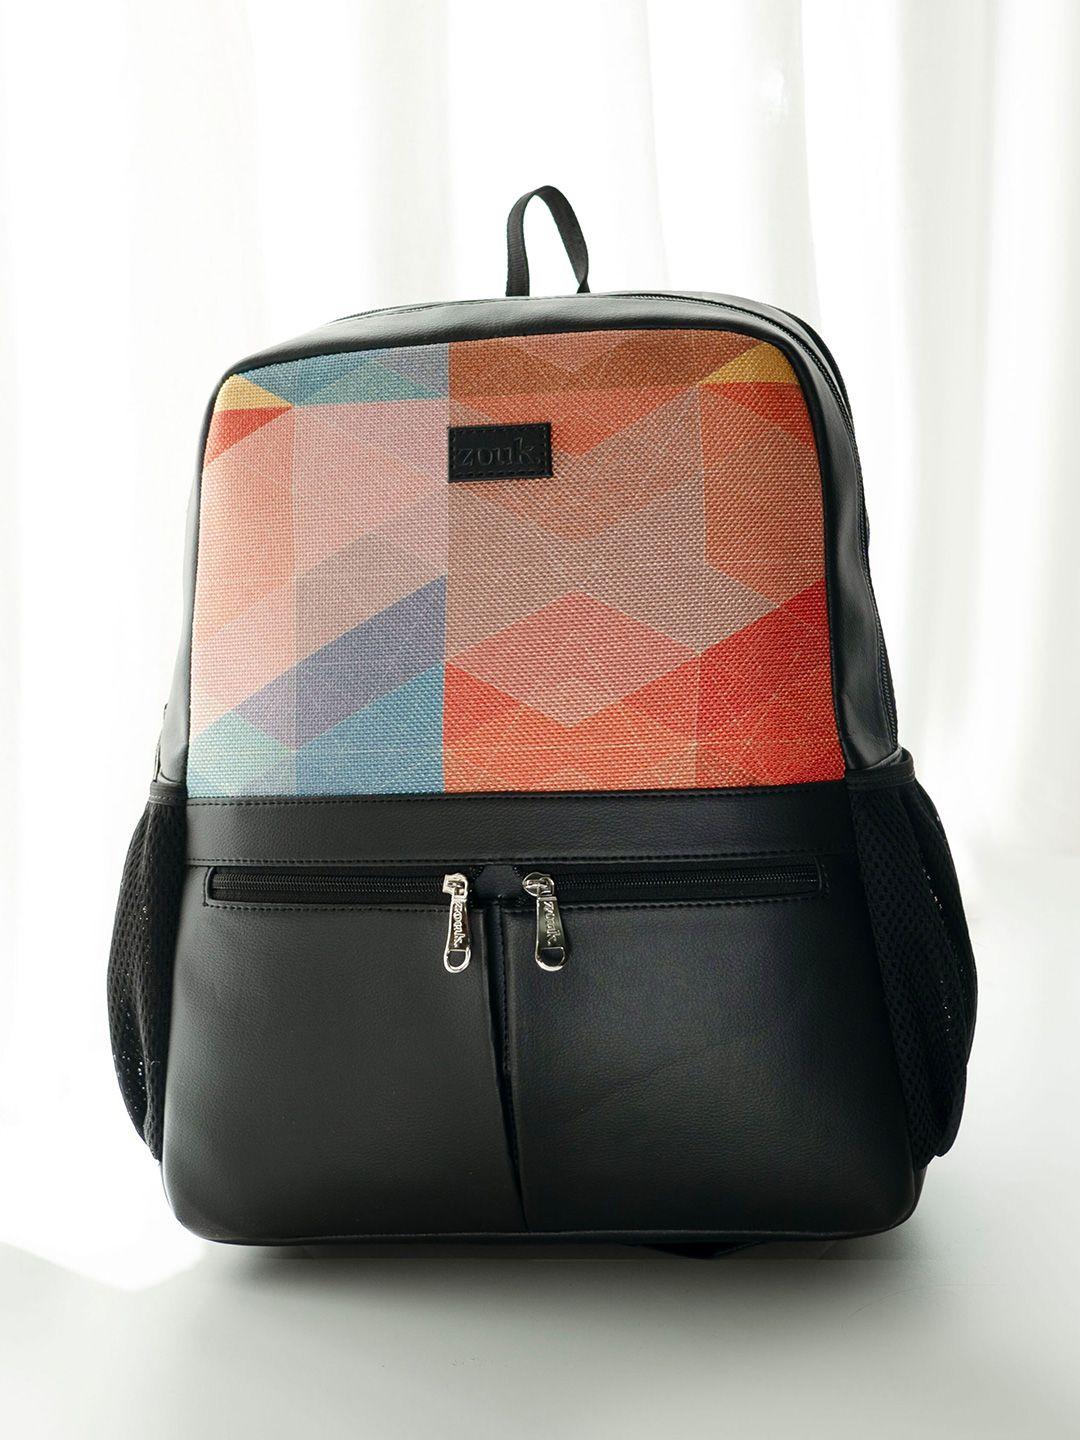 zouk geometric printed backpack with compression straps up to 16 inch